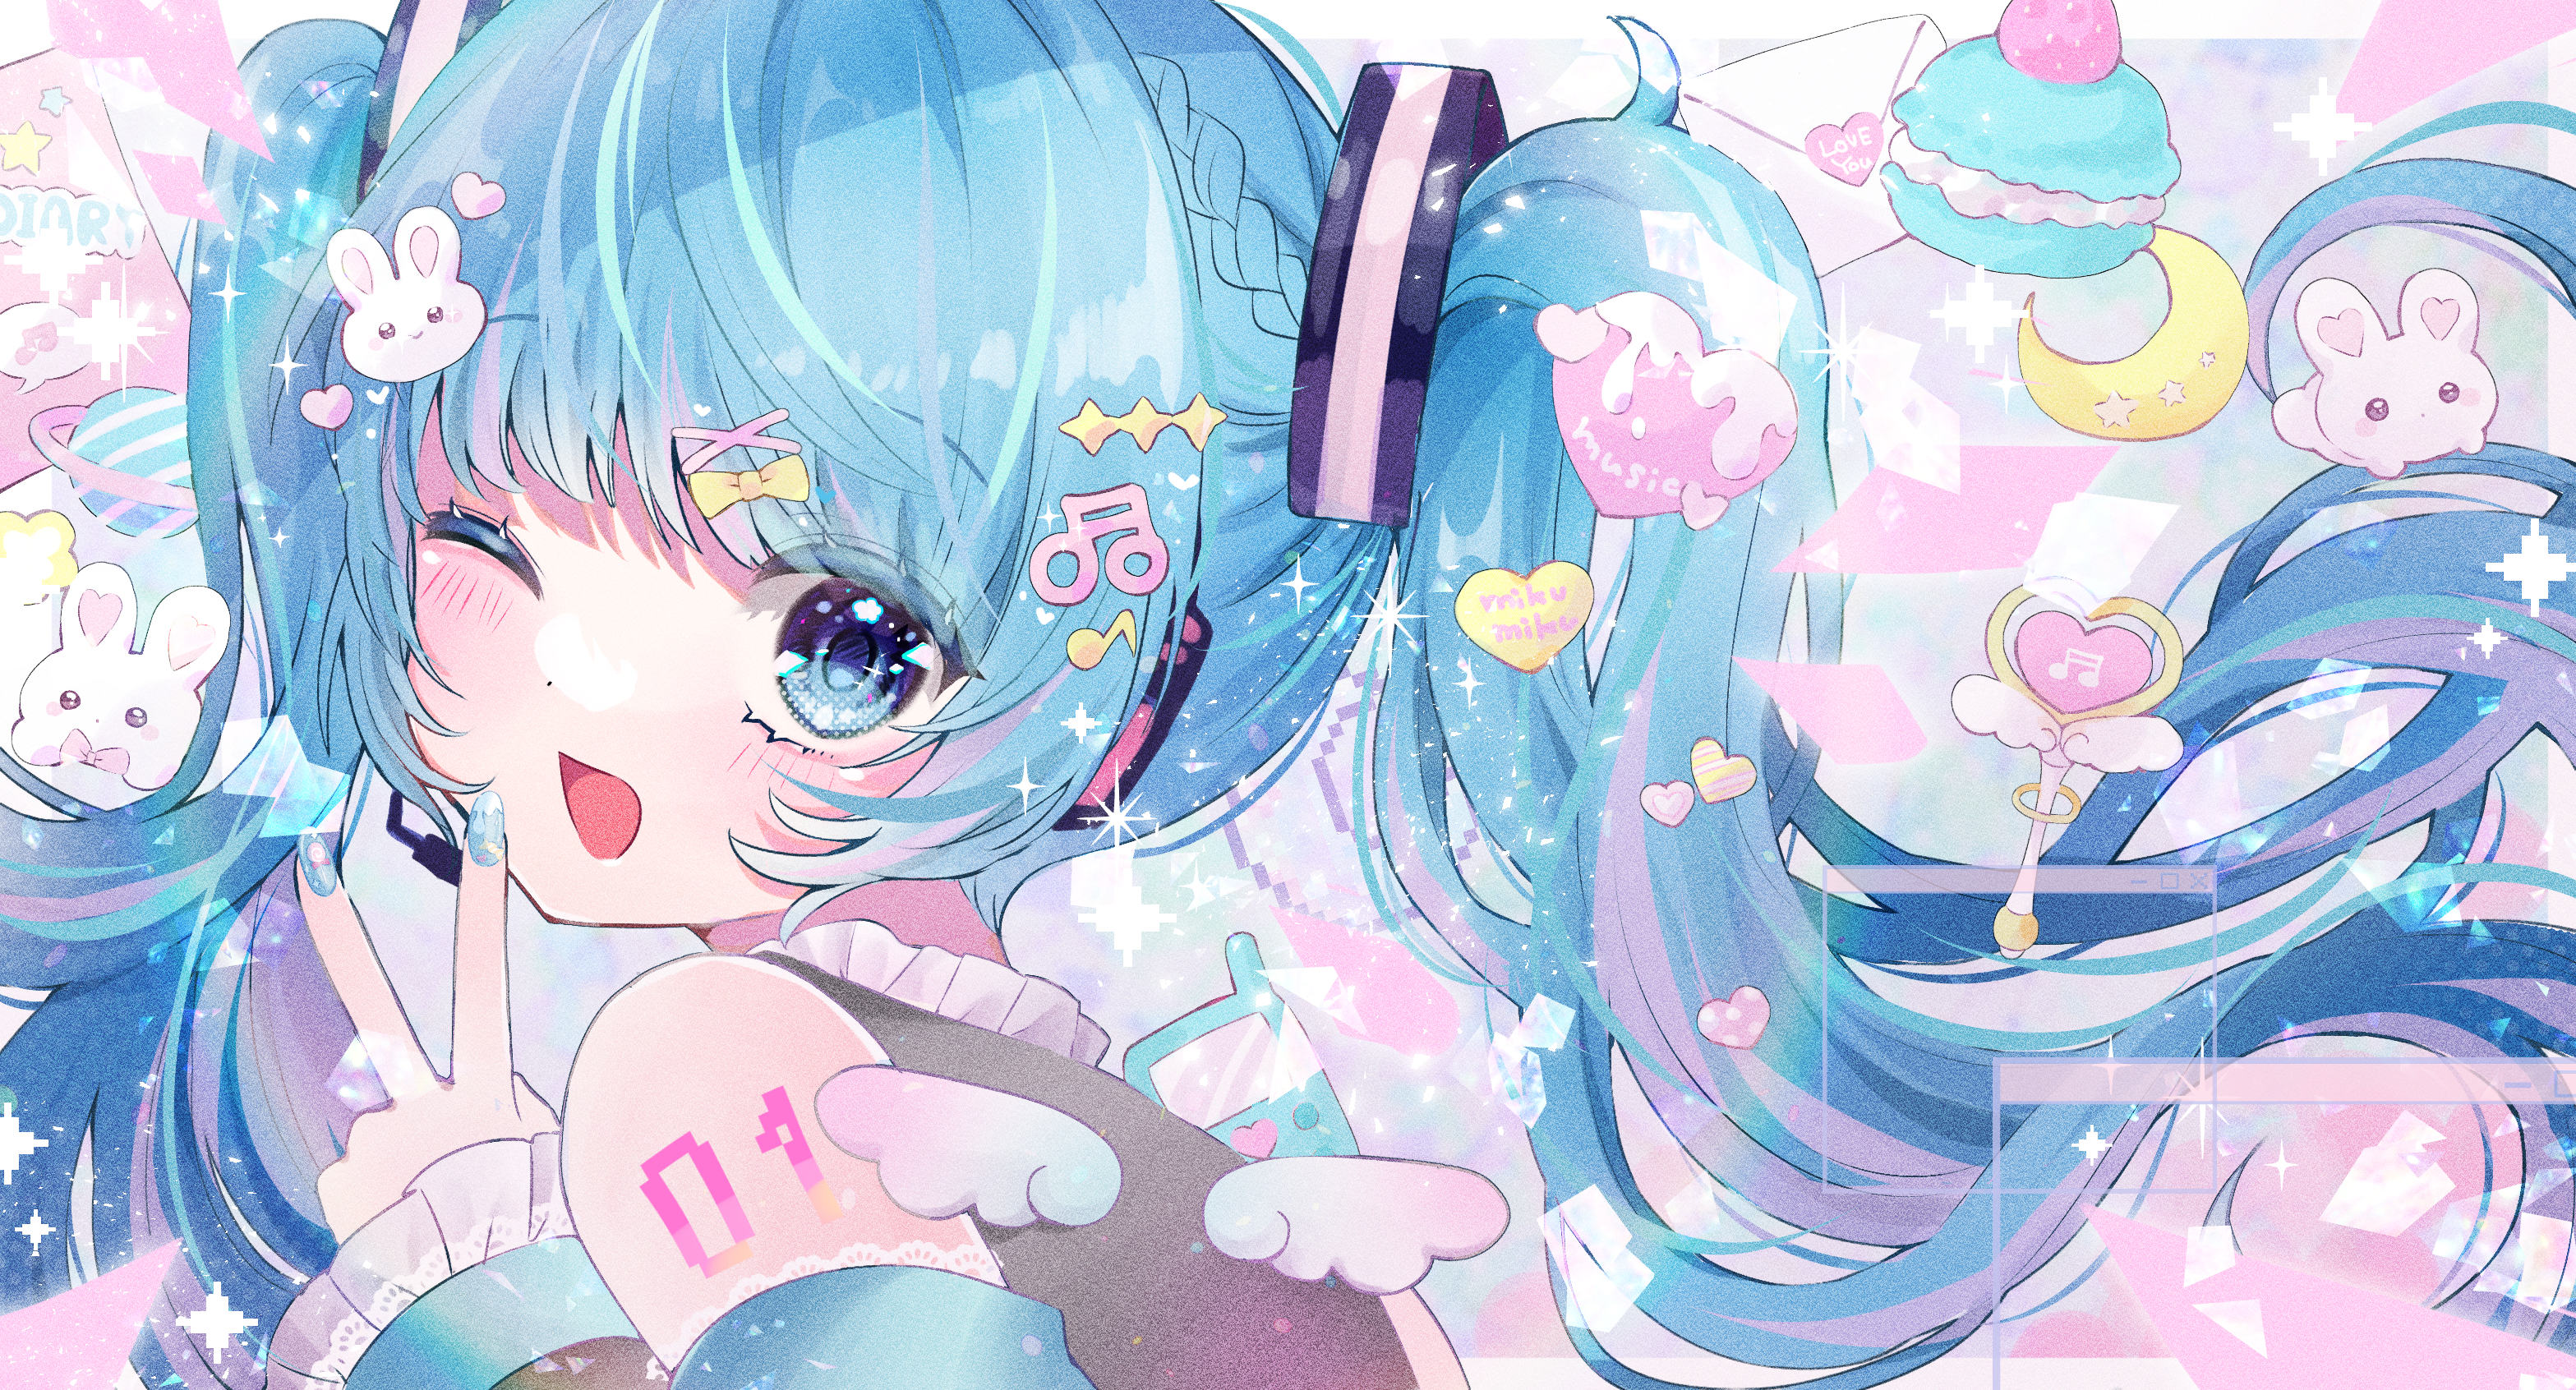 Pixiv Anime Girls Hatsune Miku Vocaloid One Eye Closed Blushing Peace Sign Open Mouth Looking At Vie 3135x1692